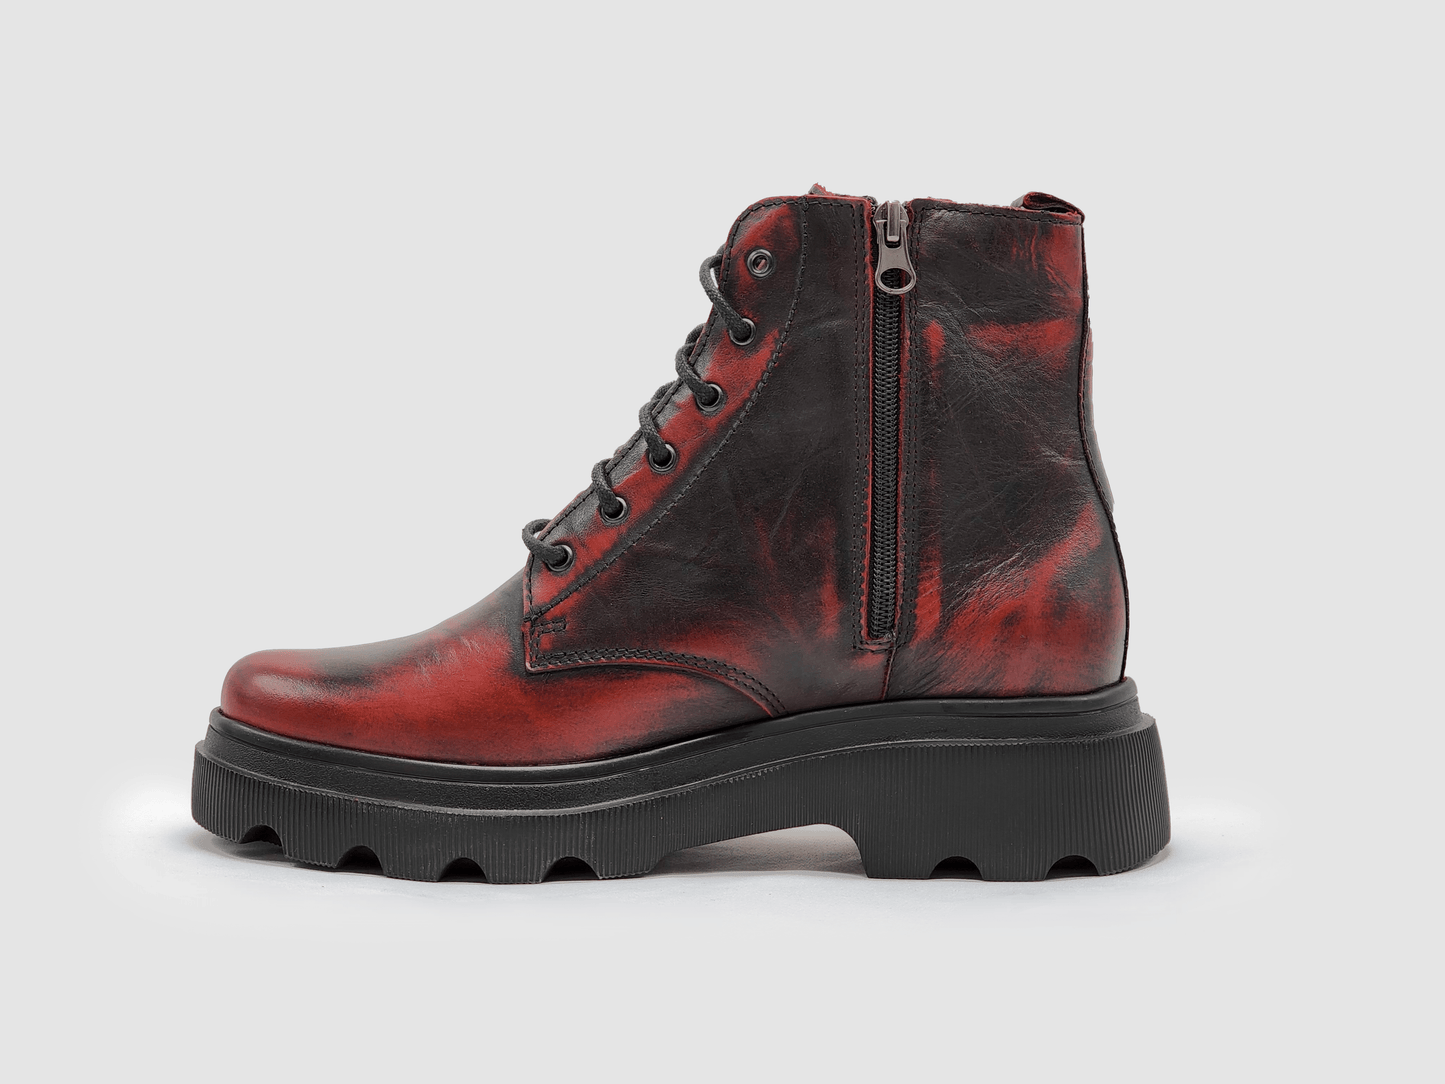 Women's Modern Insulated Zip-Up Leather Boots - Black/Red - Kacper Global Shoes 